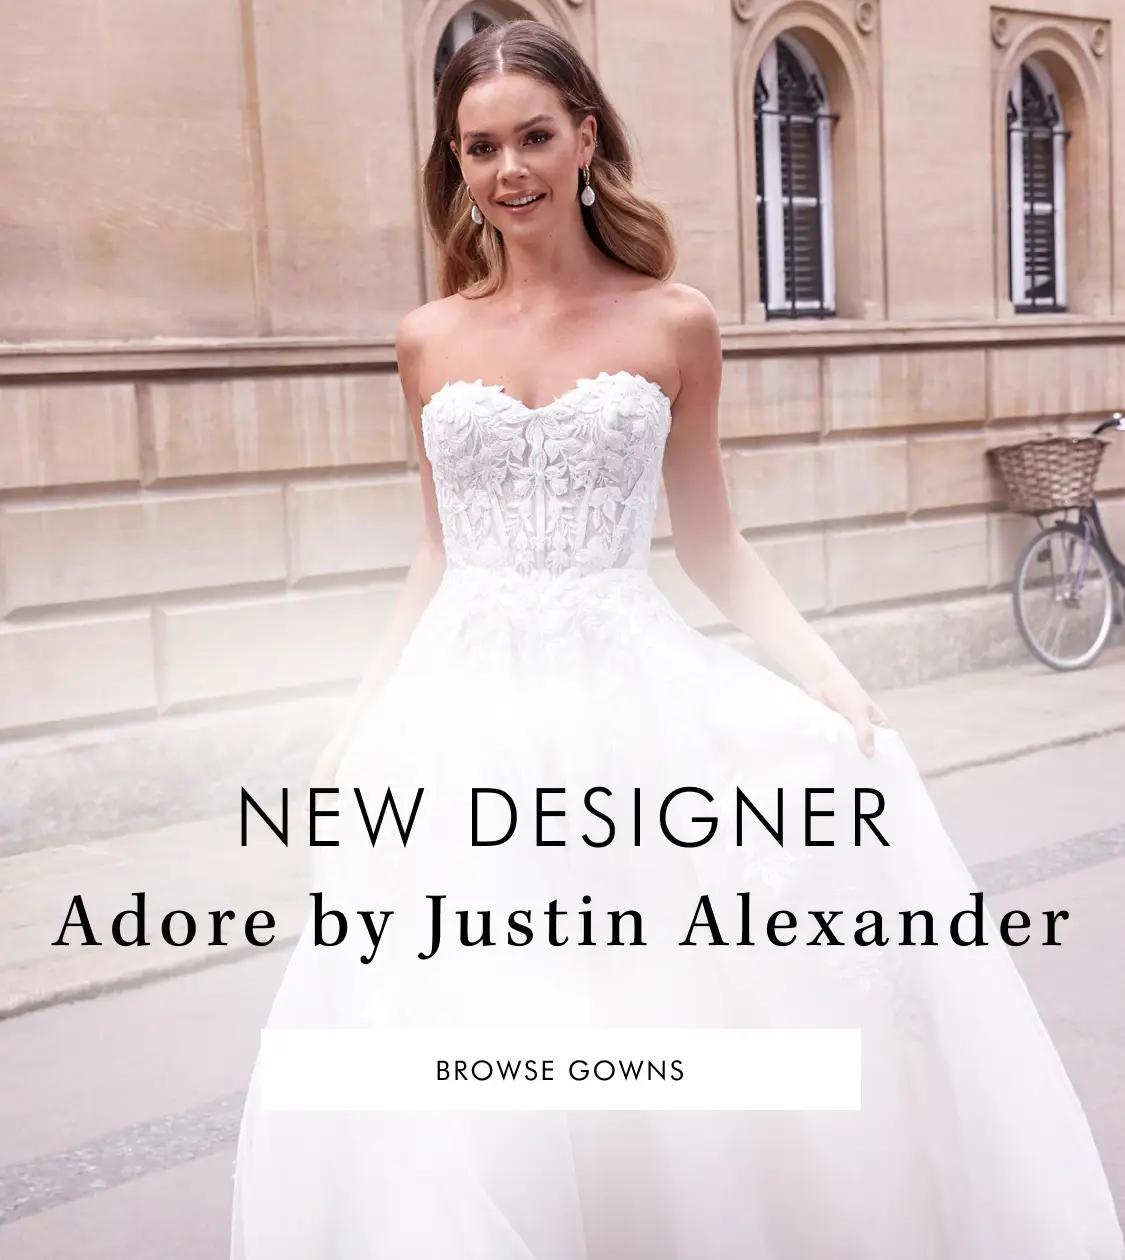 Adore by Justin Alexander Mobile